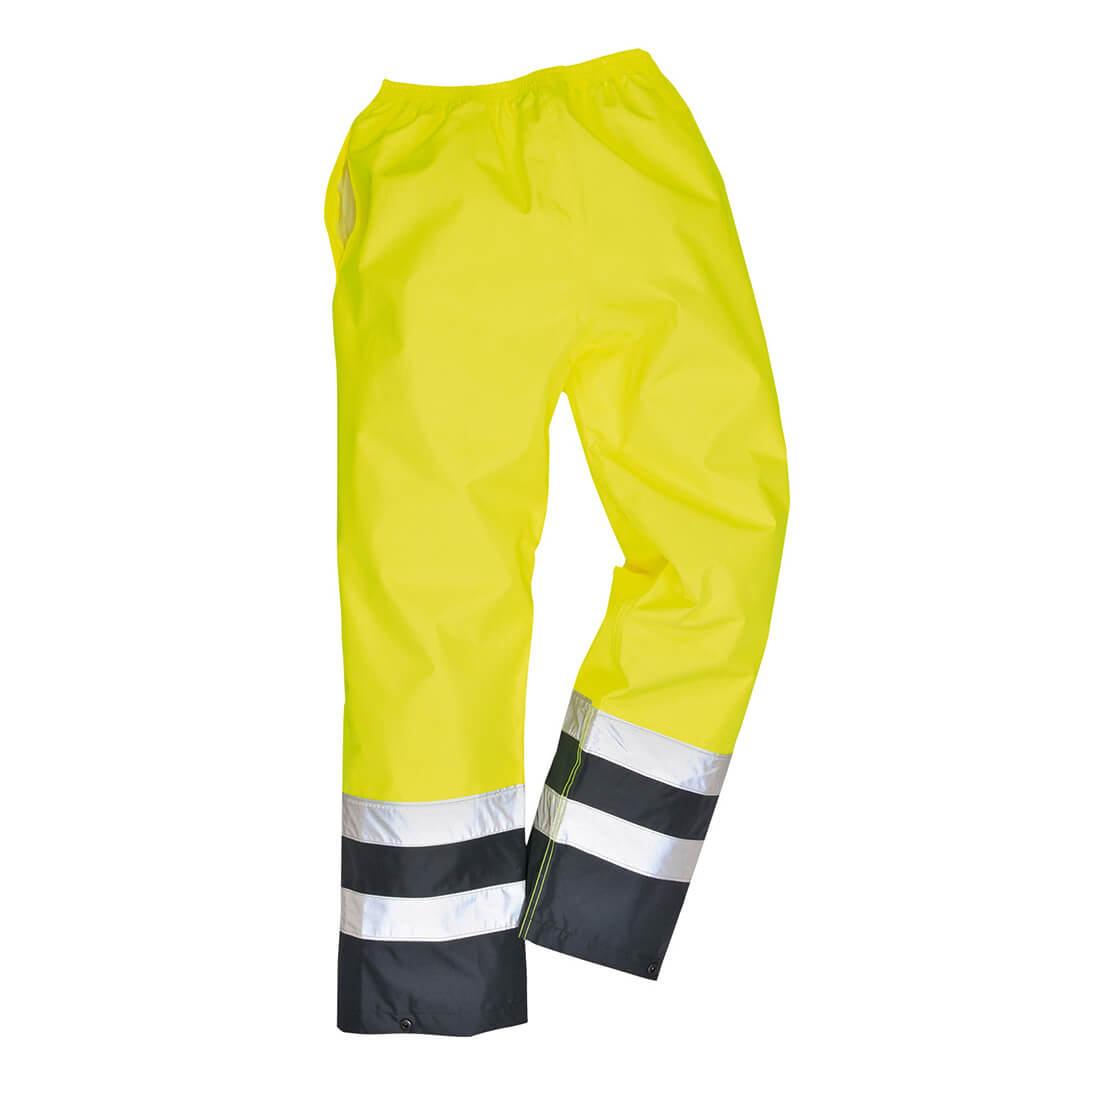 Image of Oxford Weave 300D Class 2 Two Tone Hi Vis Trousers Yellow / Navy 2XL